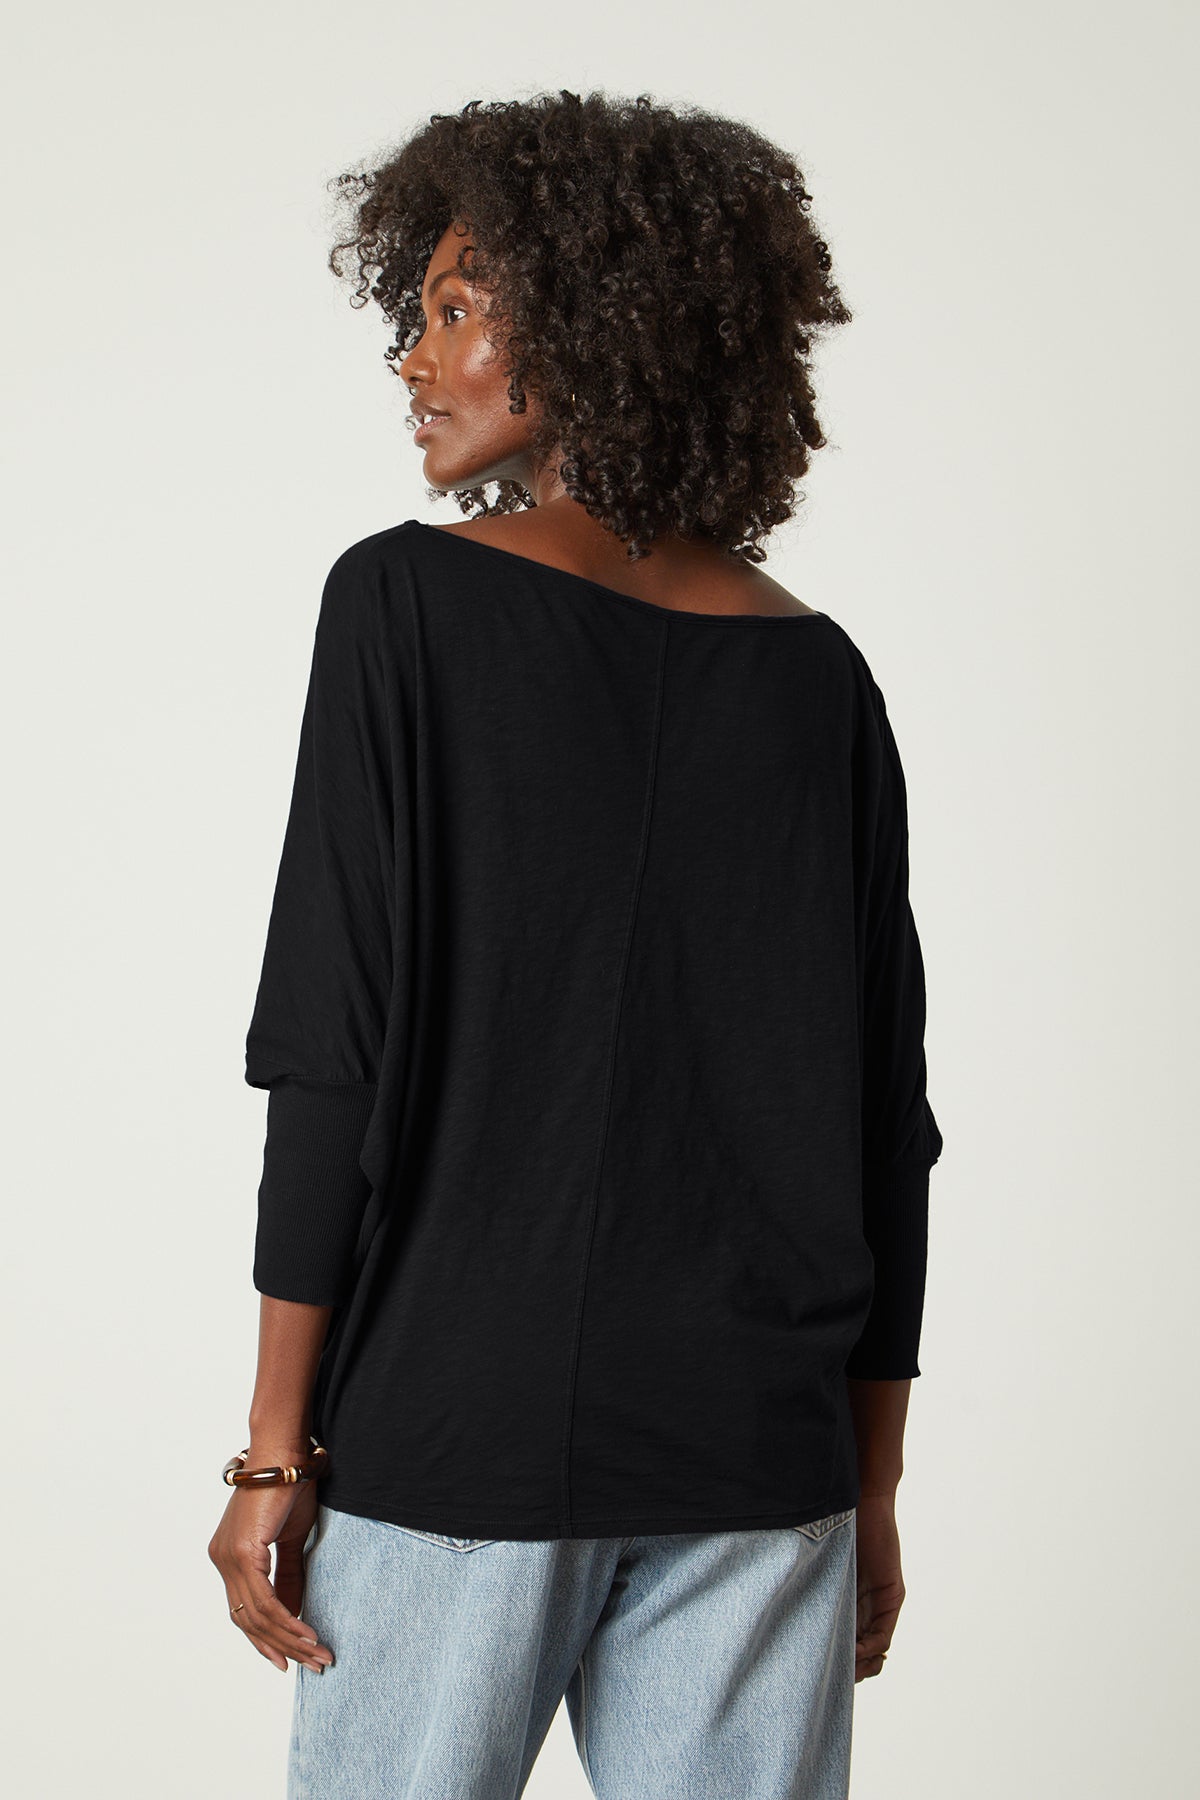 Back view of a woman wearing the Velvet by Graham & Spencer JOSS DOLMAN SLEEVE TEE and jeans.-26235758379201